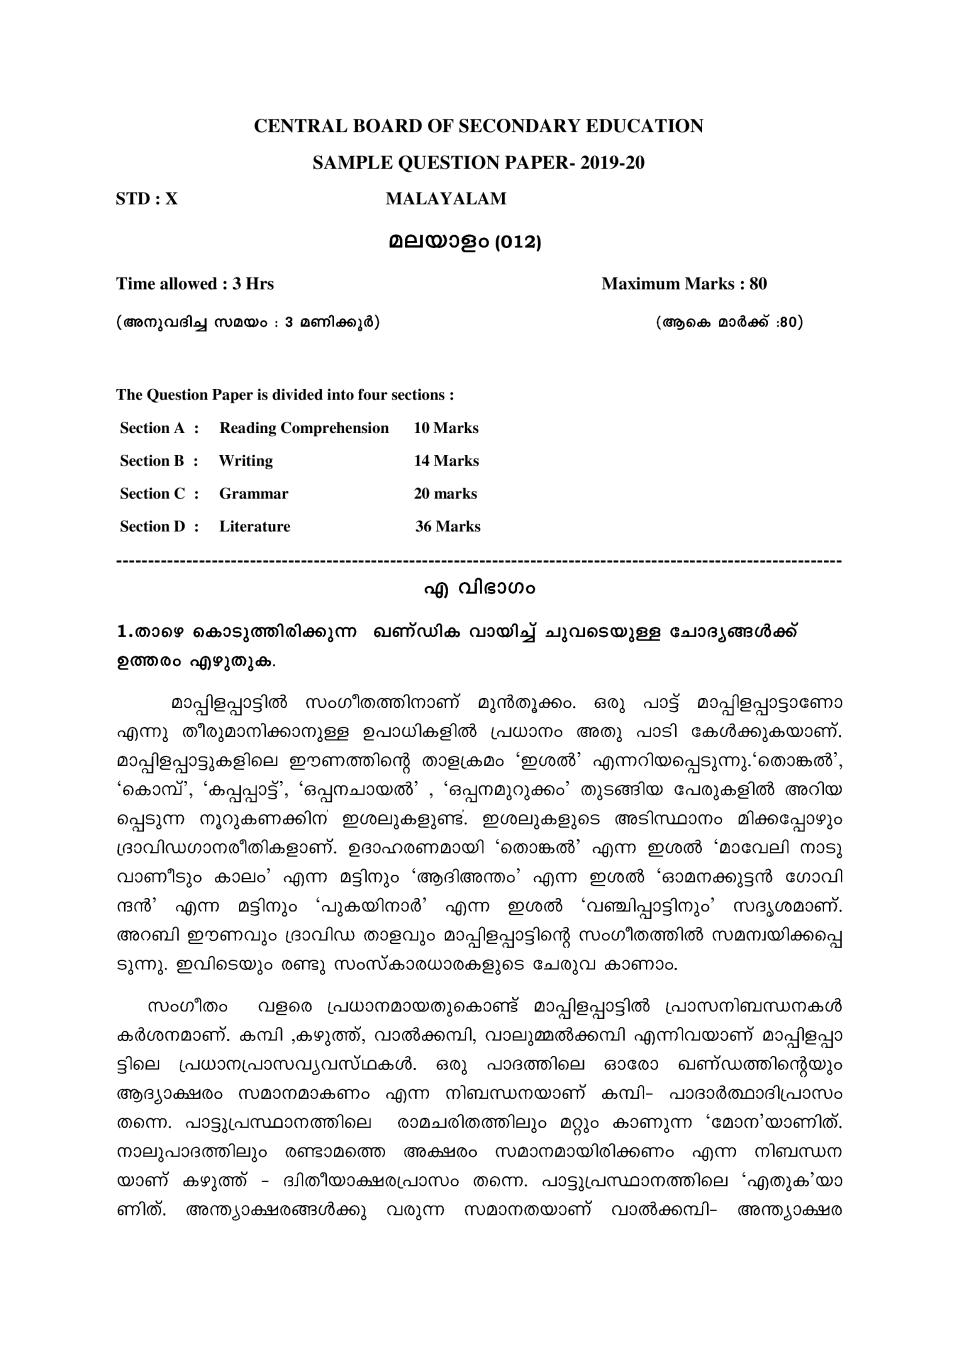 Cbse Class 10 Sample Paper 2020 For Malayalam